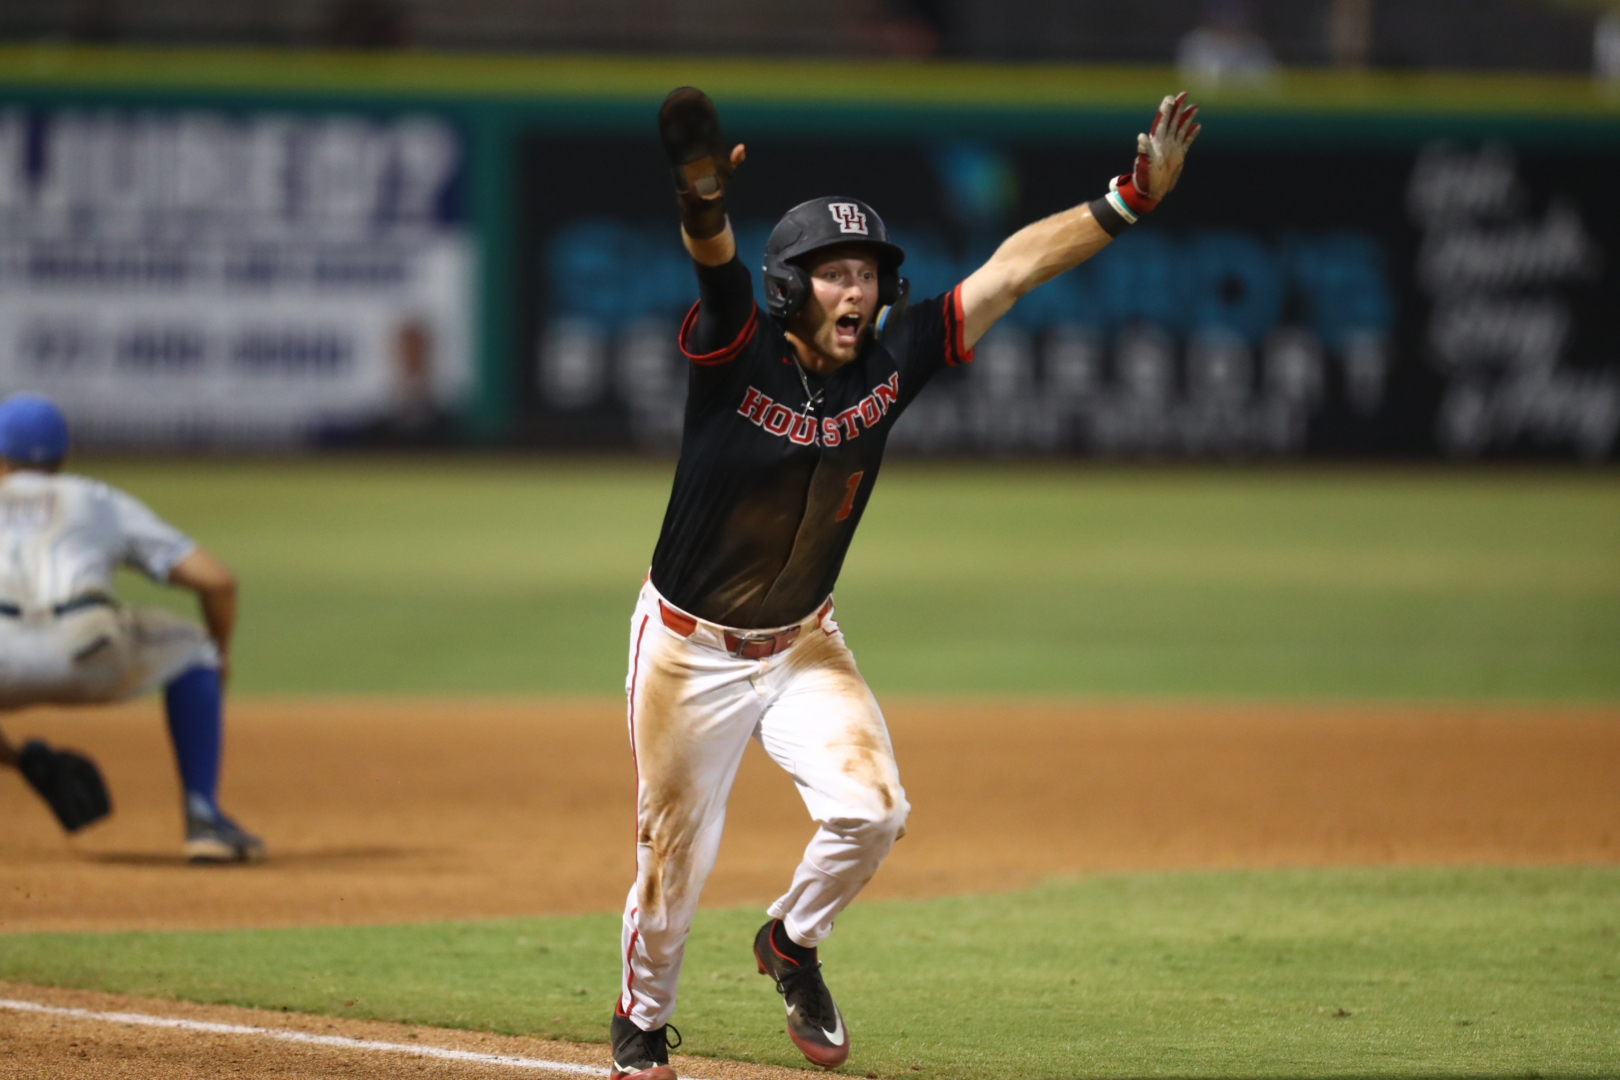 Brandon Burckel throws his arms in the air as he scores the winning run for UH baseball in the Cougars' walk-off victory over Memphis on Thursday evening at the AAC tournament in Clearwater, Florida. | American Athletic Conference/Mary Holt